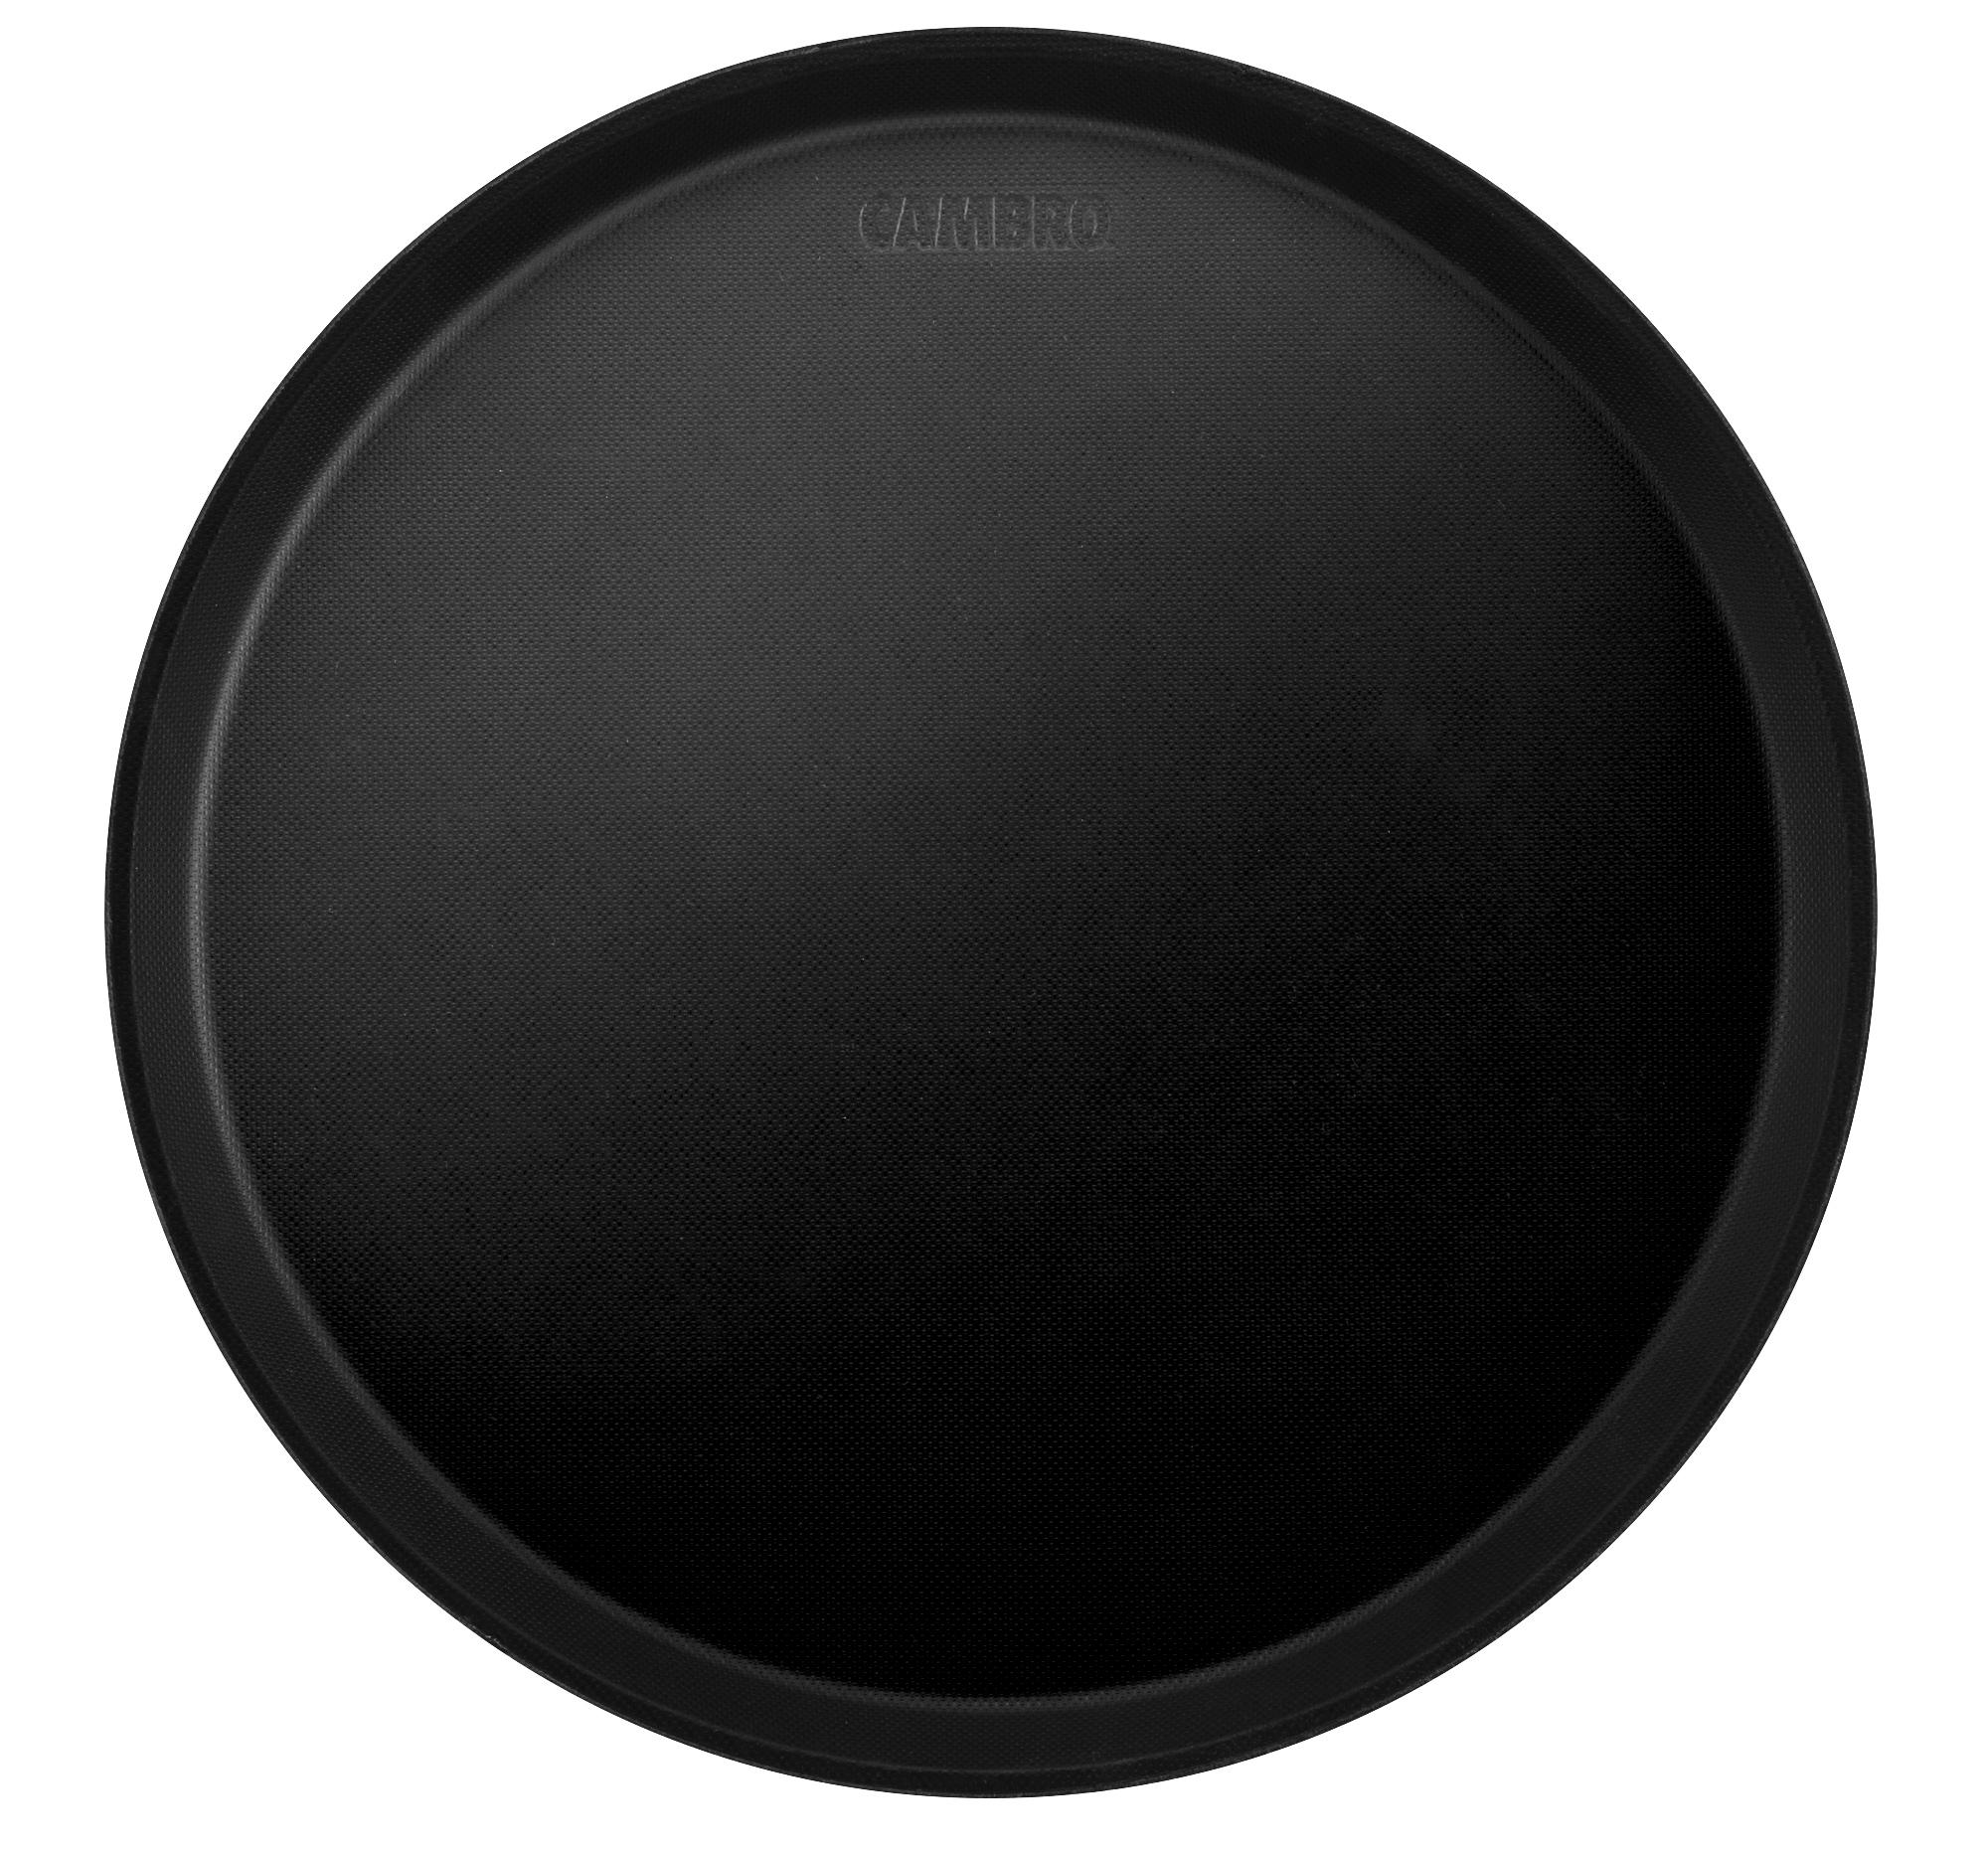 Camtread serving tray, round, non-slip surface, black, 405mm